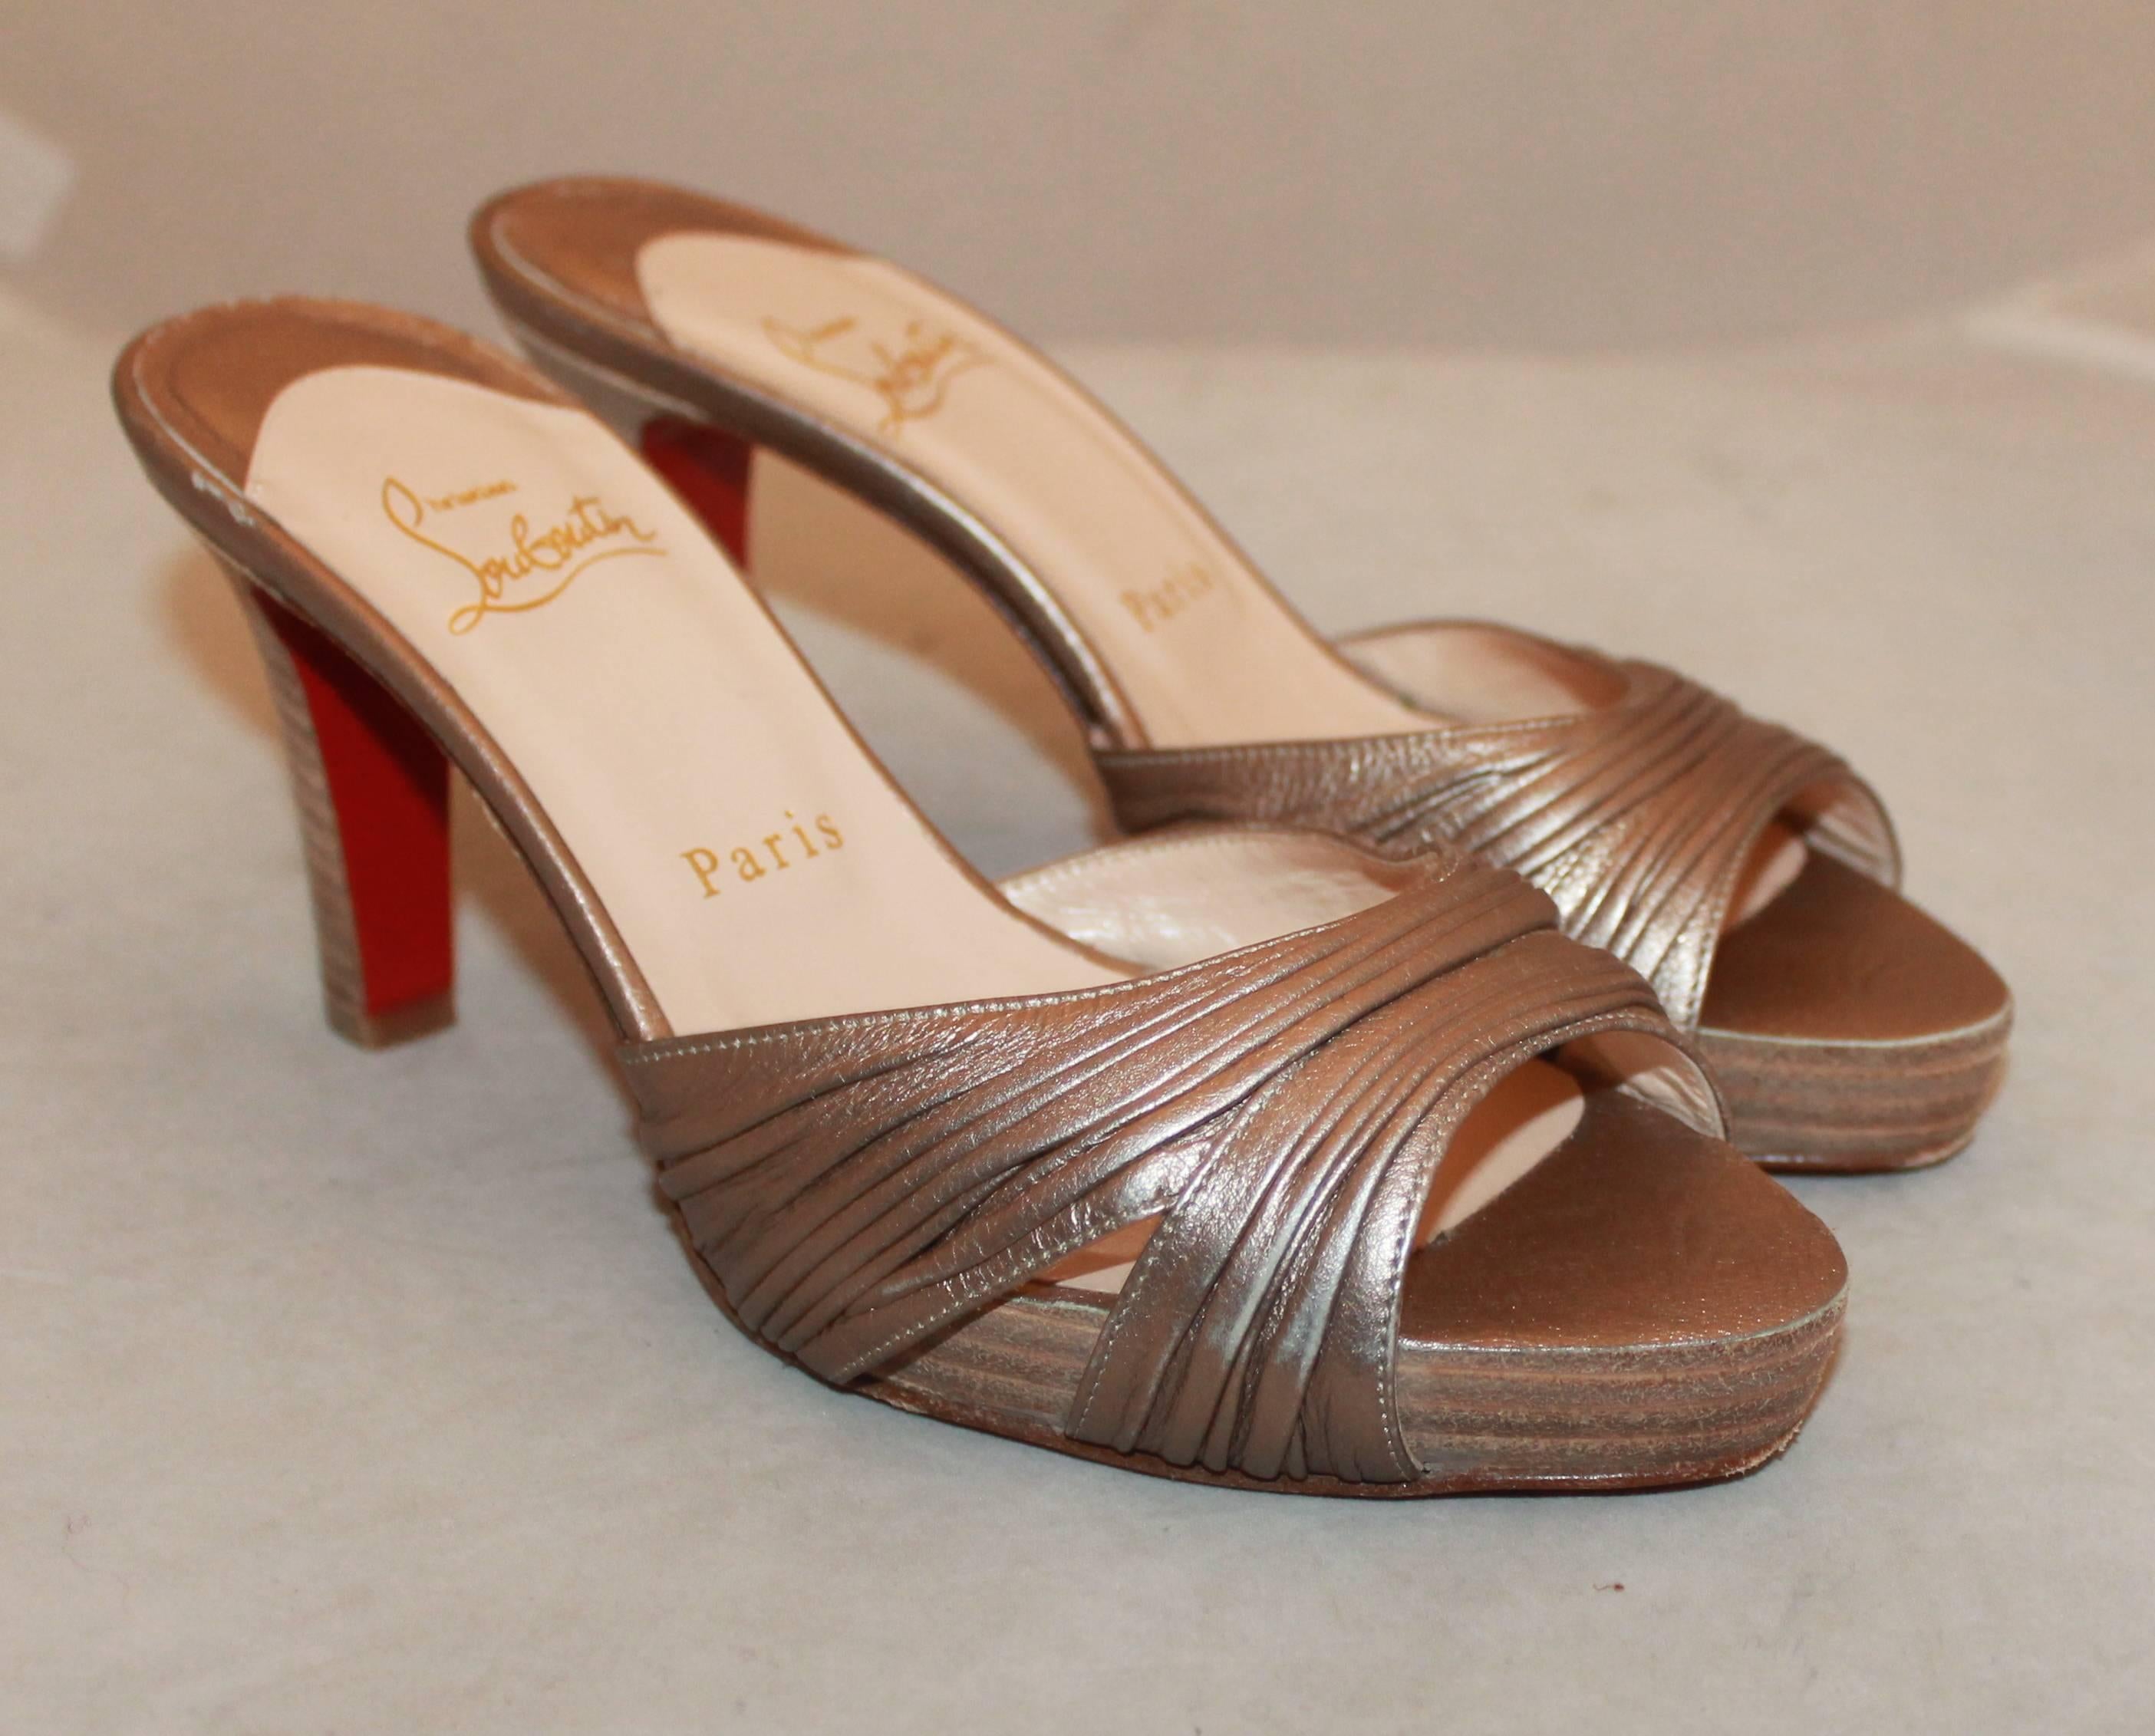 Christian Louboutin Bronze Woodstack Heel - 37.  These lovely sandal heels are in good condition with some visible wear to the bottom.  They feature a gorgeous bronze metallic look, a sandal look, and a woodstack heel.  these are excellent shoes for